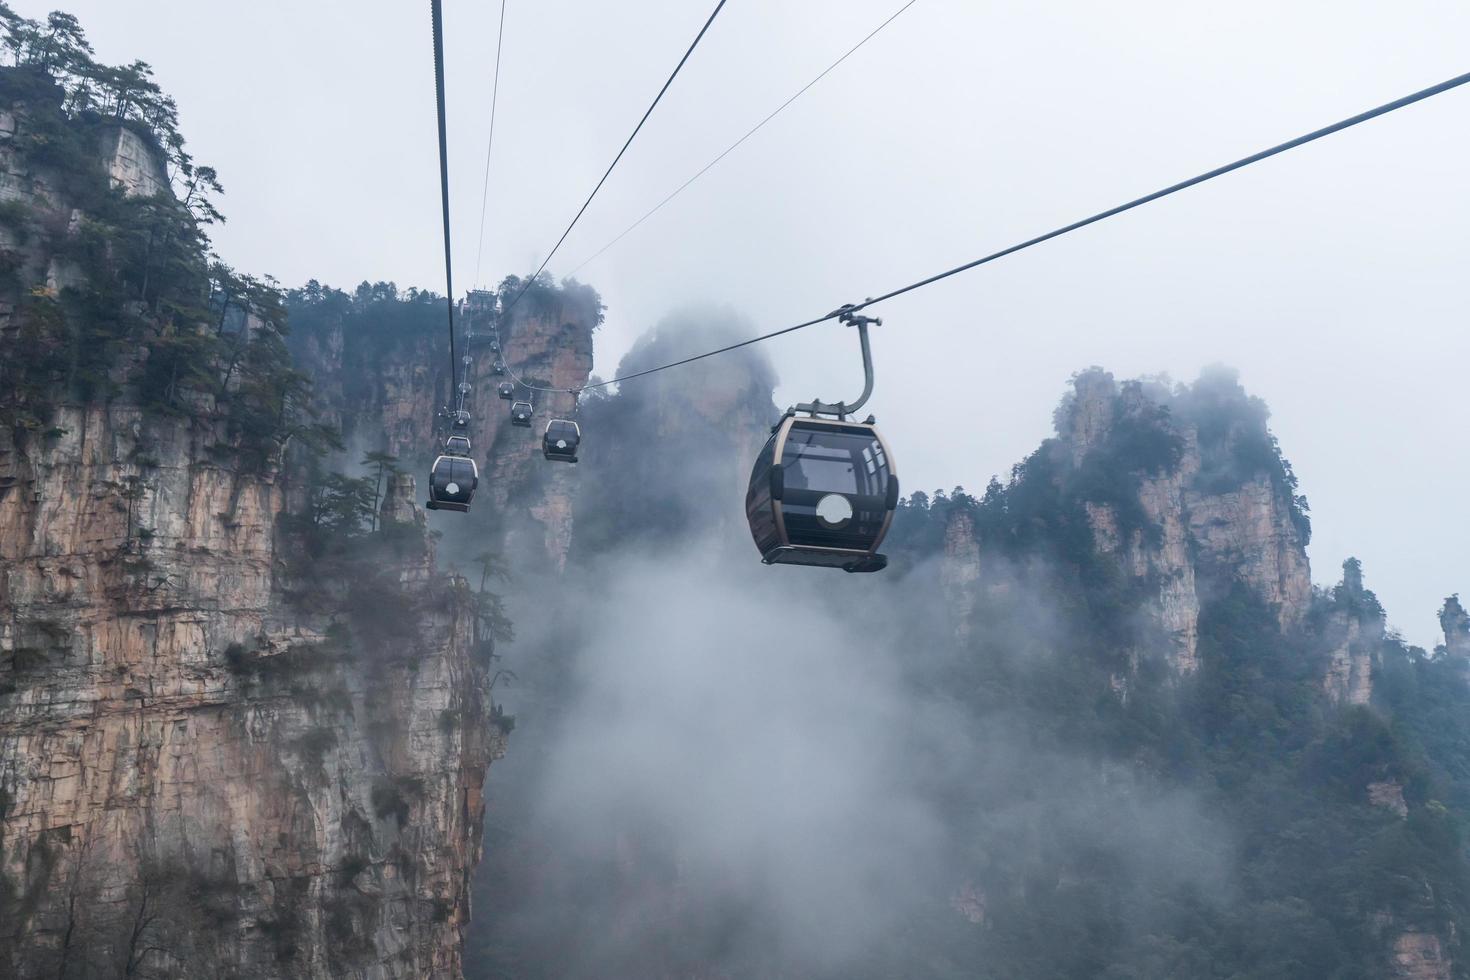 Moving Cable Cars ropeway of Zhangjiajie National Forest Park, UNESCO World Heritage Site Wulingyuan Hunan China photo